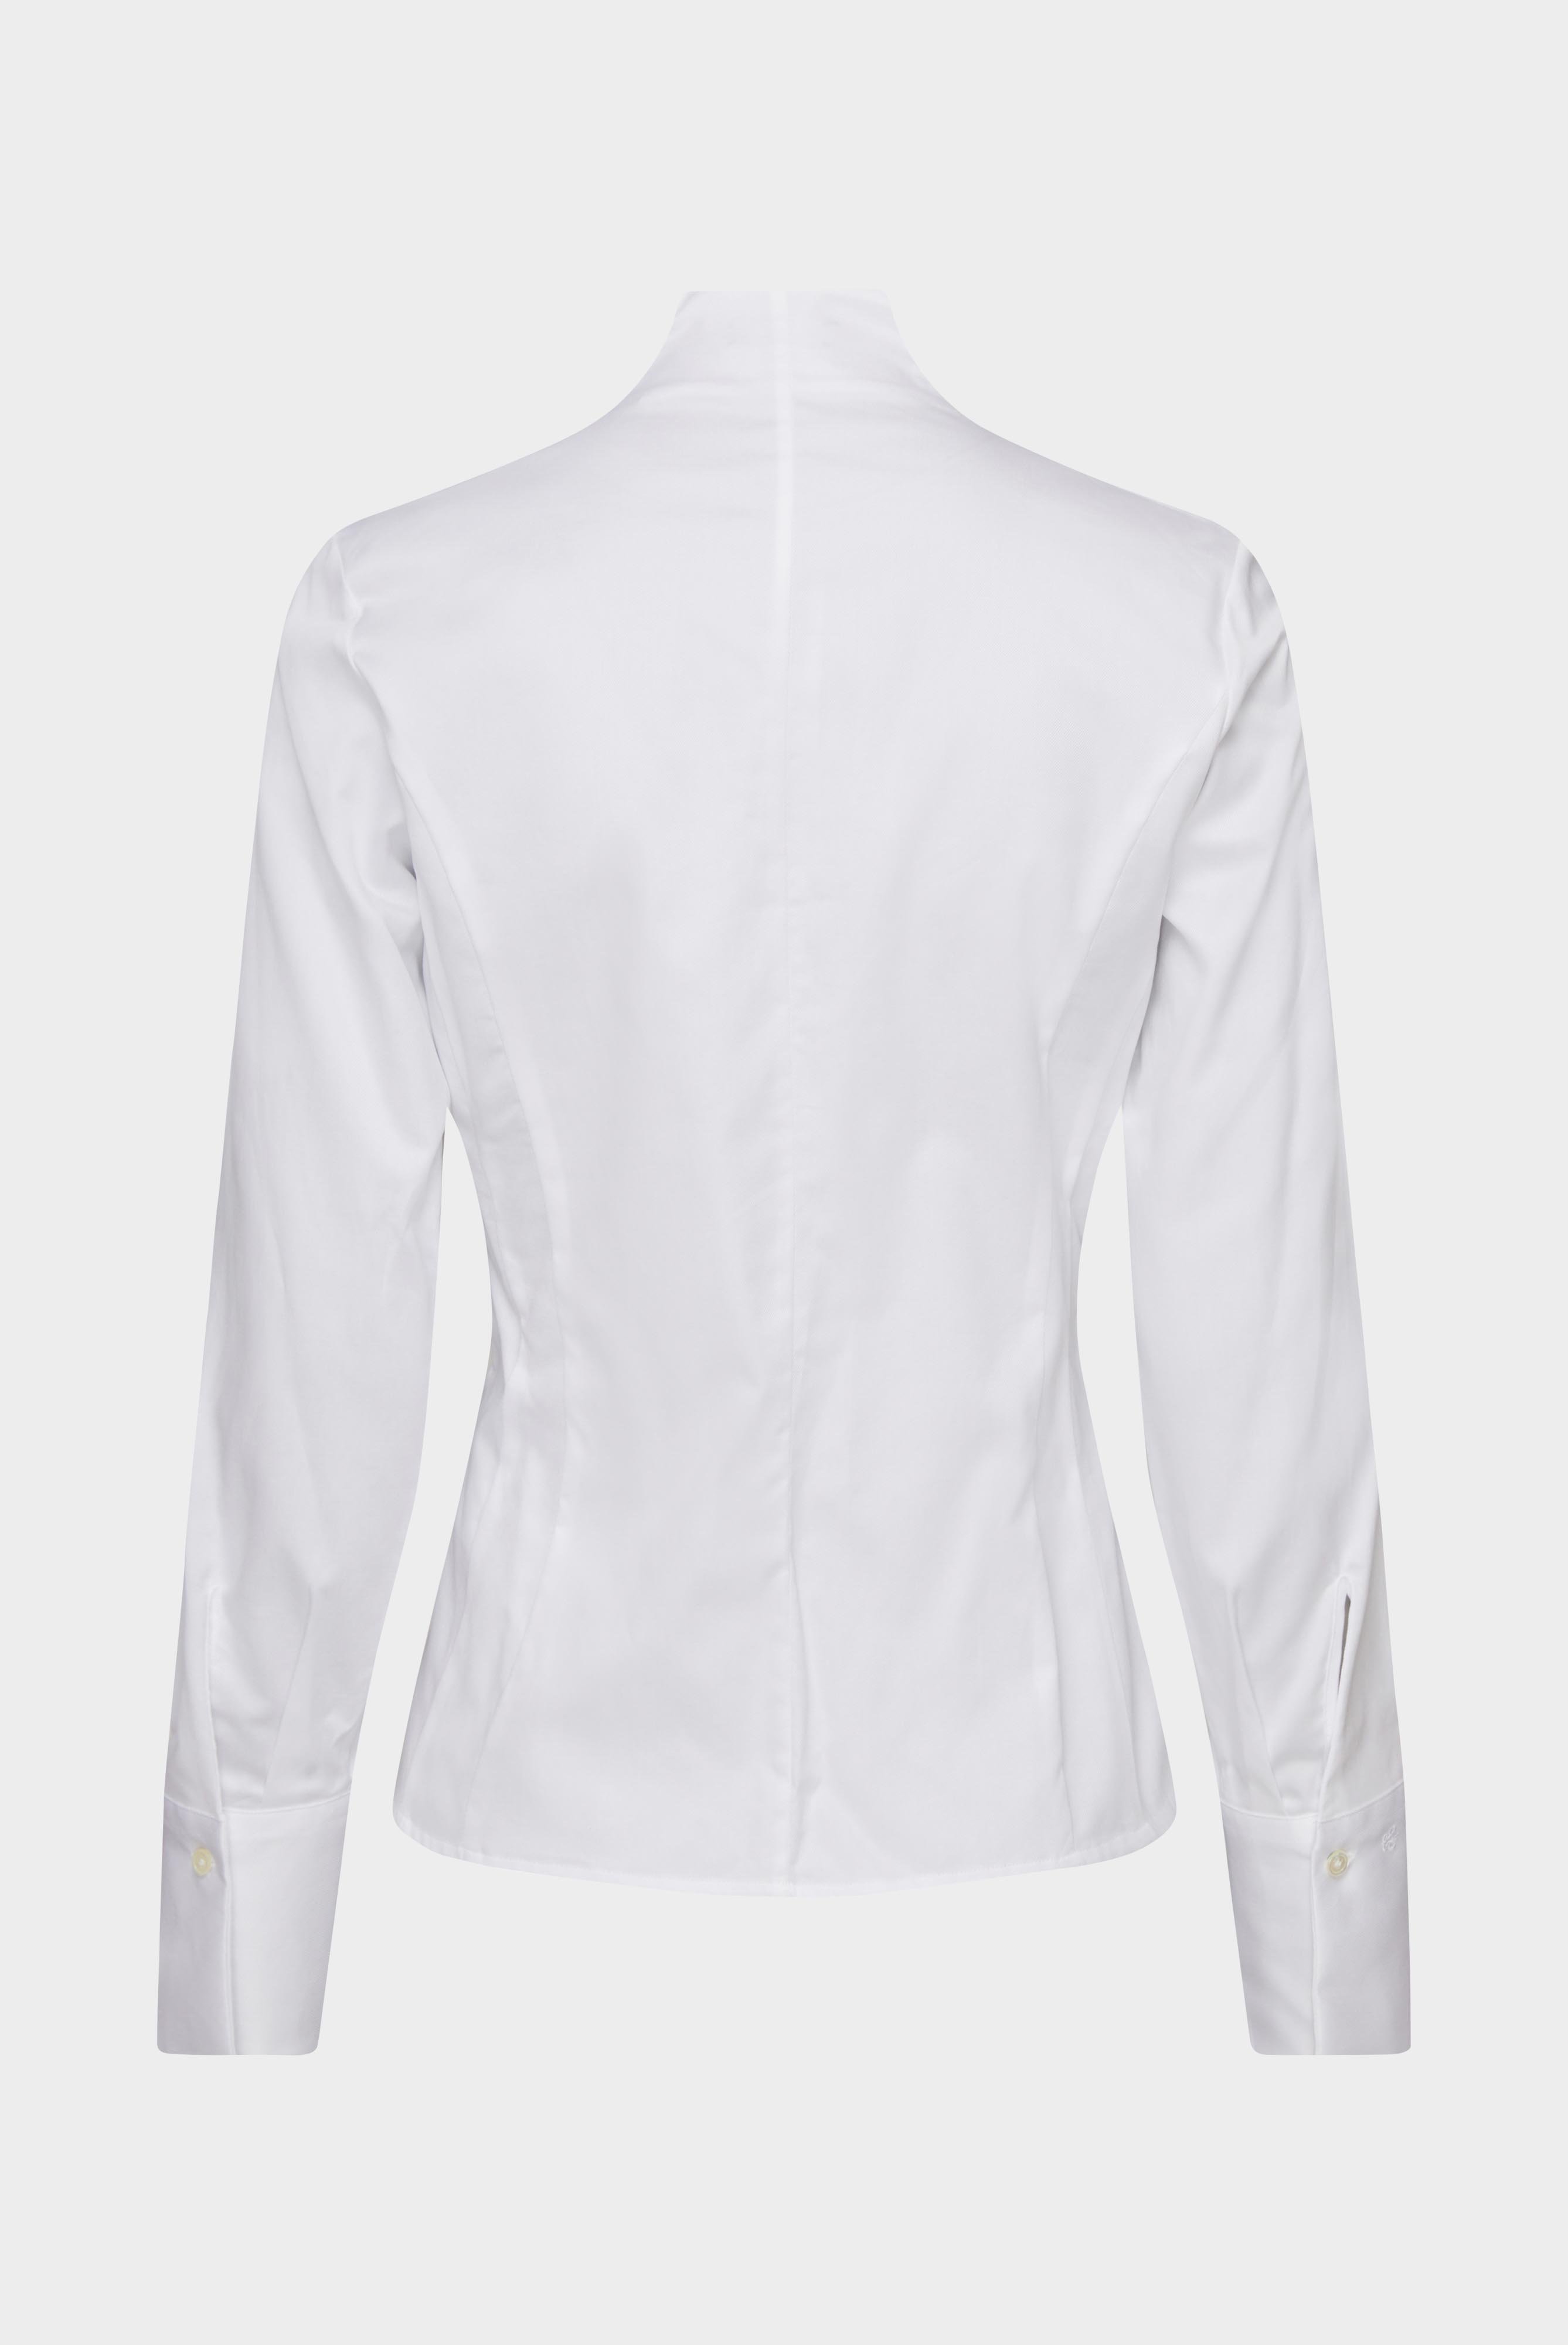 Business Blouses+Twill Chalice Collar Blouse+05.3612.73.130148.000.32